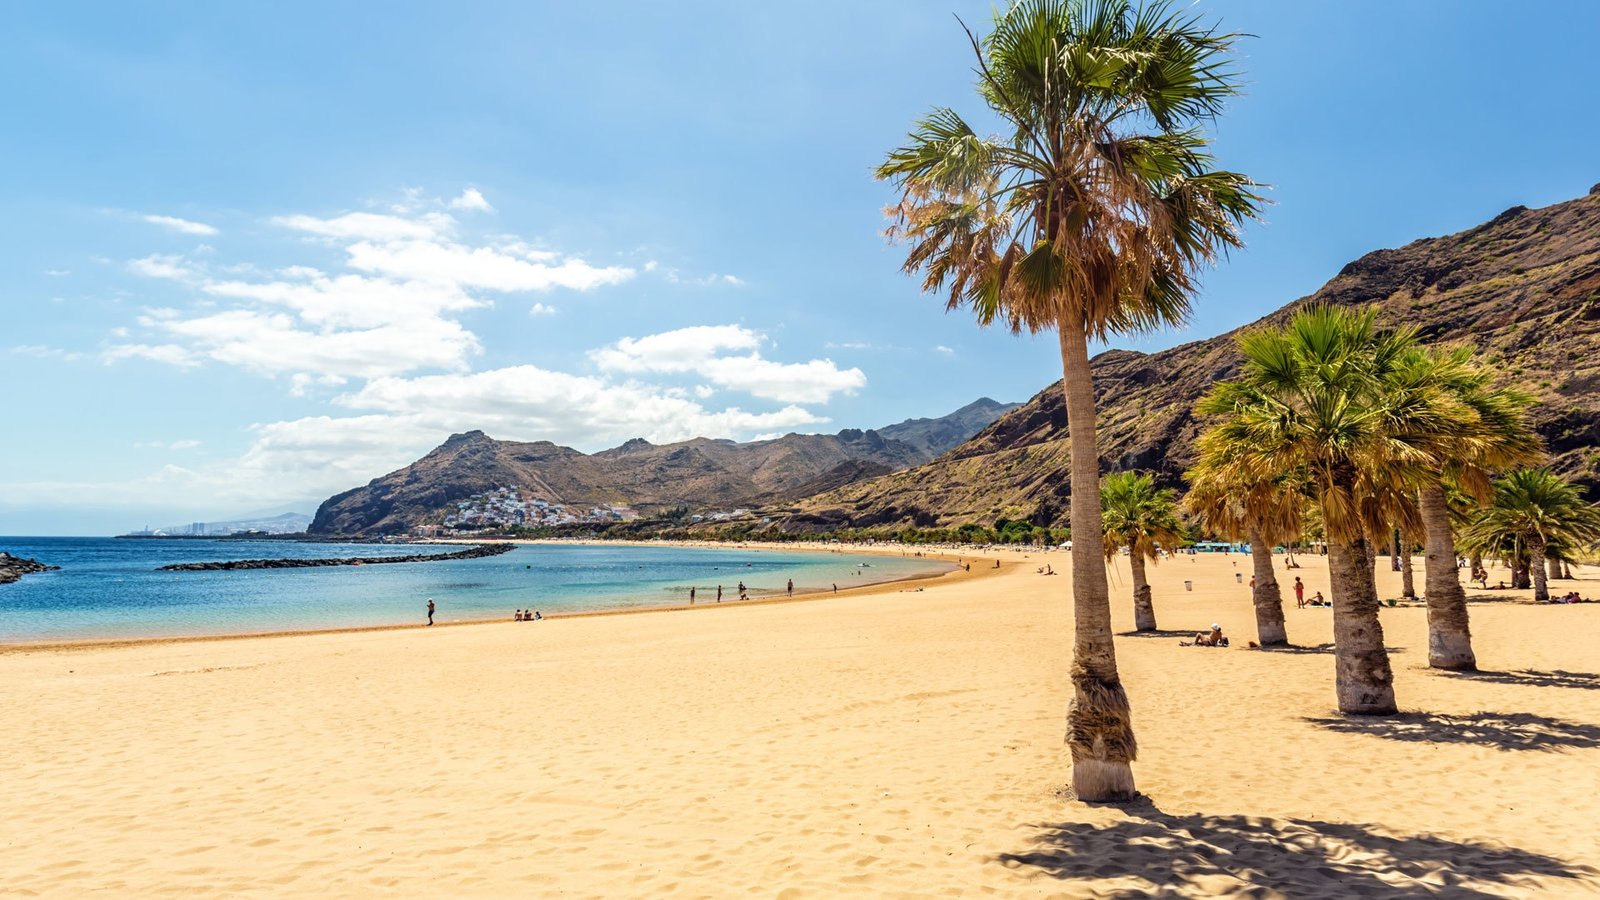 Heading to the Canary Islands? Here's the top 9 things to do